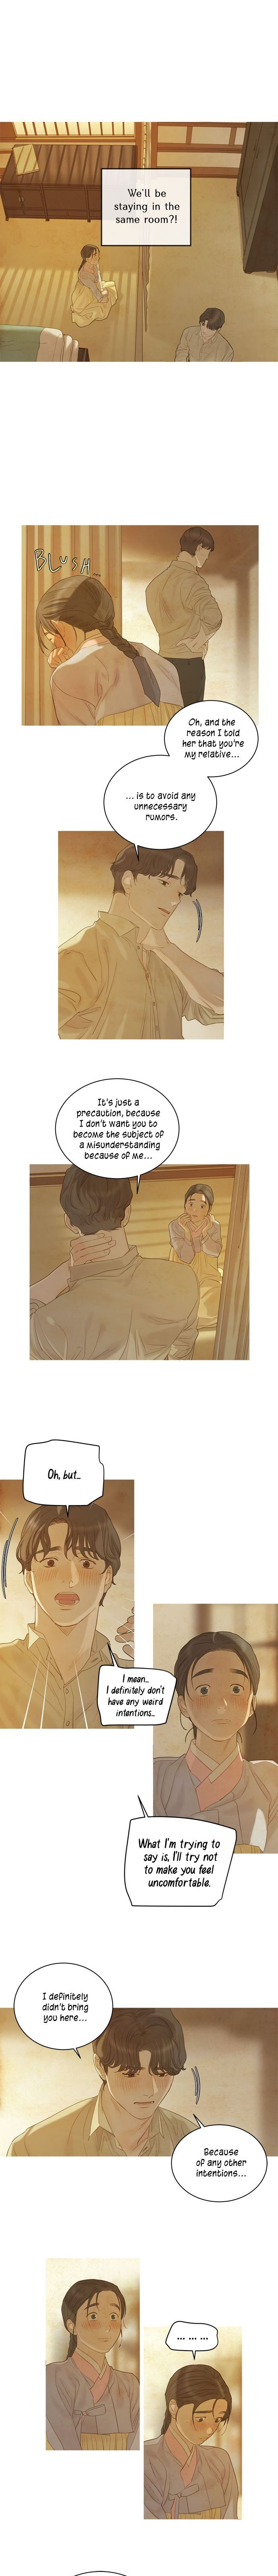 Gorae Byul - The Gyeongseong Mermaid - Chapter 27 Page 3